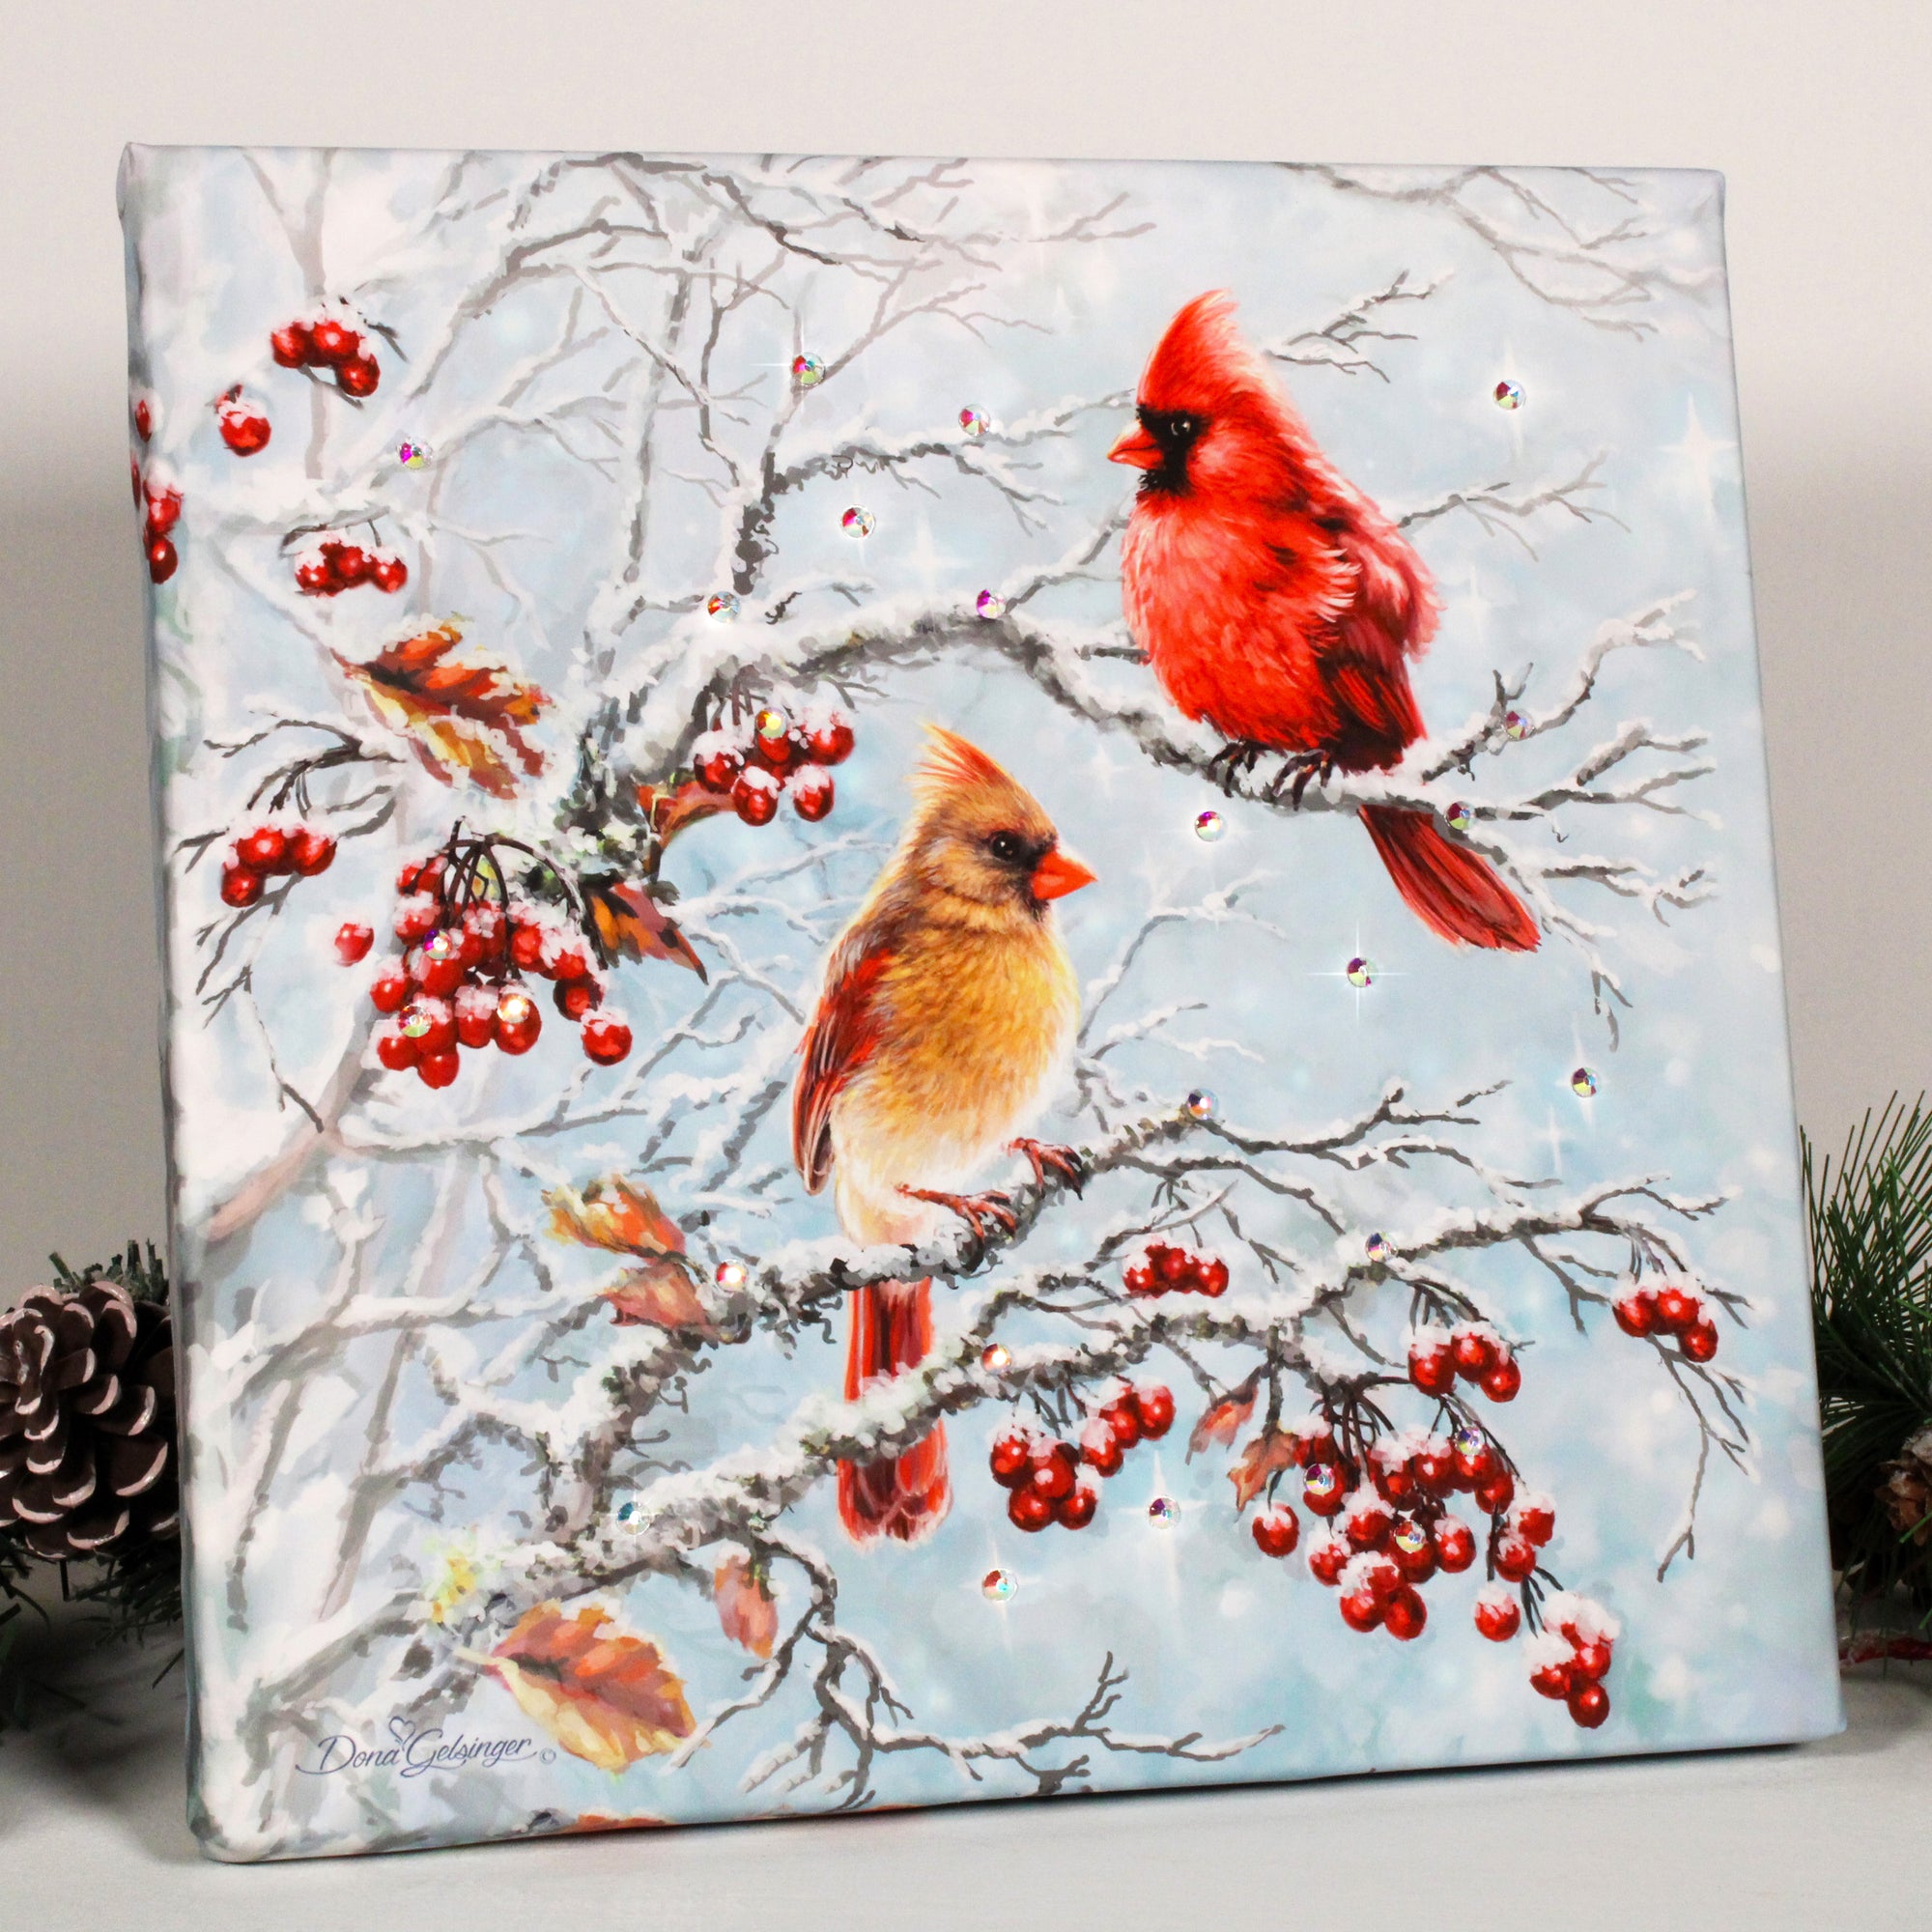 two stunning cardinals perched on snow-covered branches, surrounded by an abundance of vibrant red berries. This breathtaking scene captures the essence of the season.